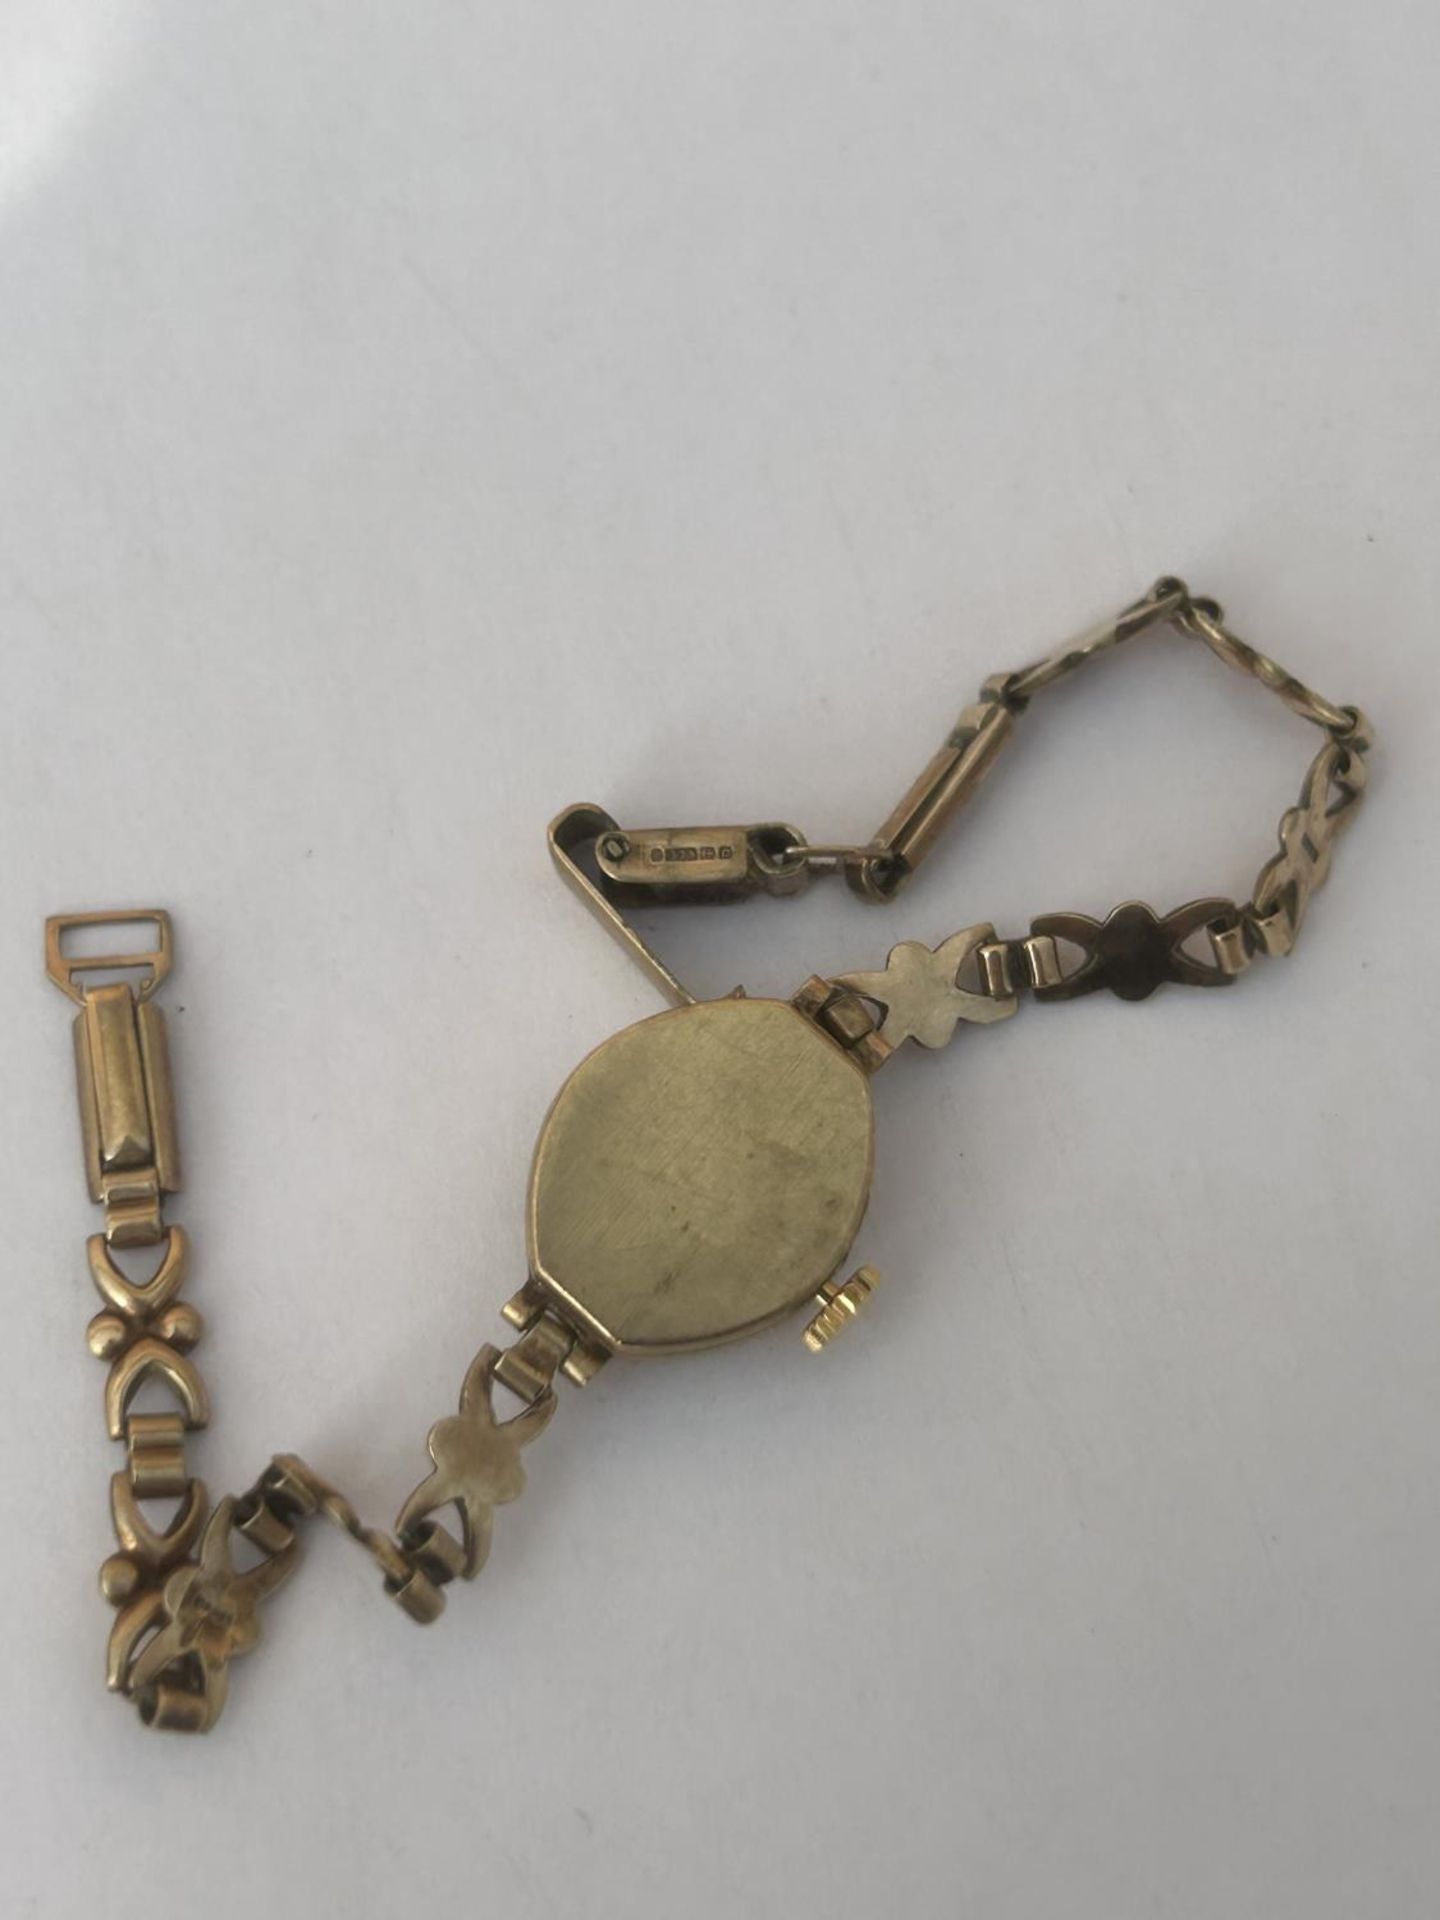 A HALLMARKED 9CT GOLD LADIES ACCURIST WATCH ON A 9CT GOLD BRACELET WITH A 21 JEWEL MOVEMENT, GROSS - Image 5 of 5